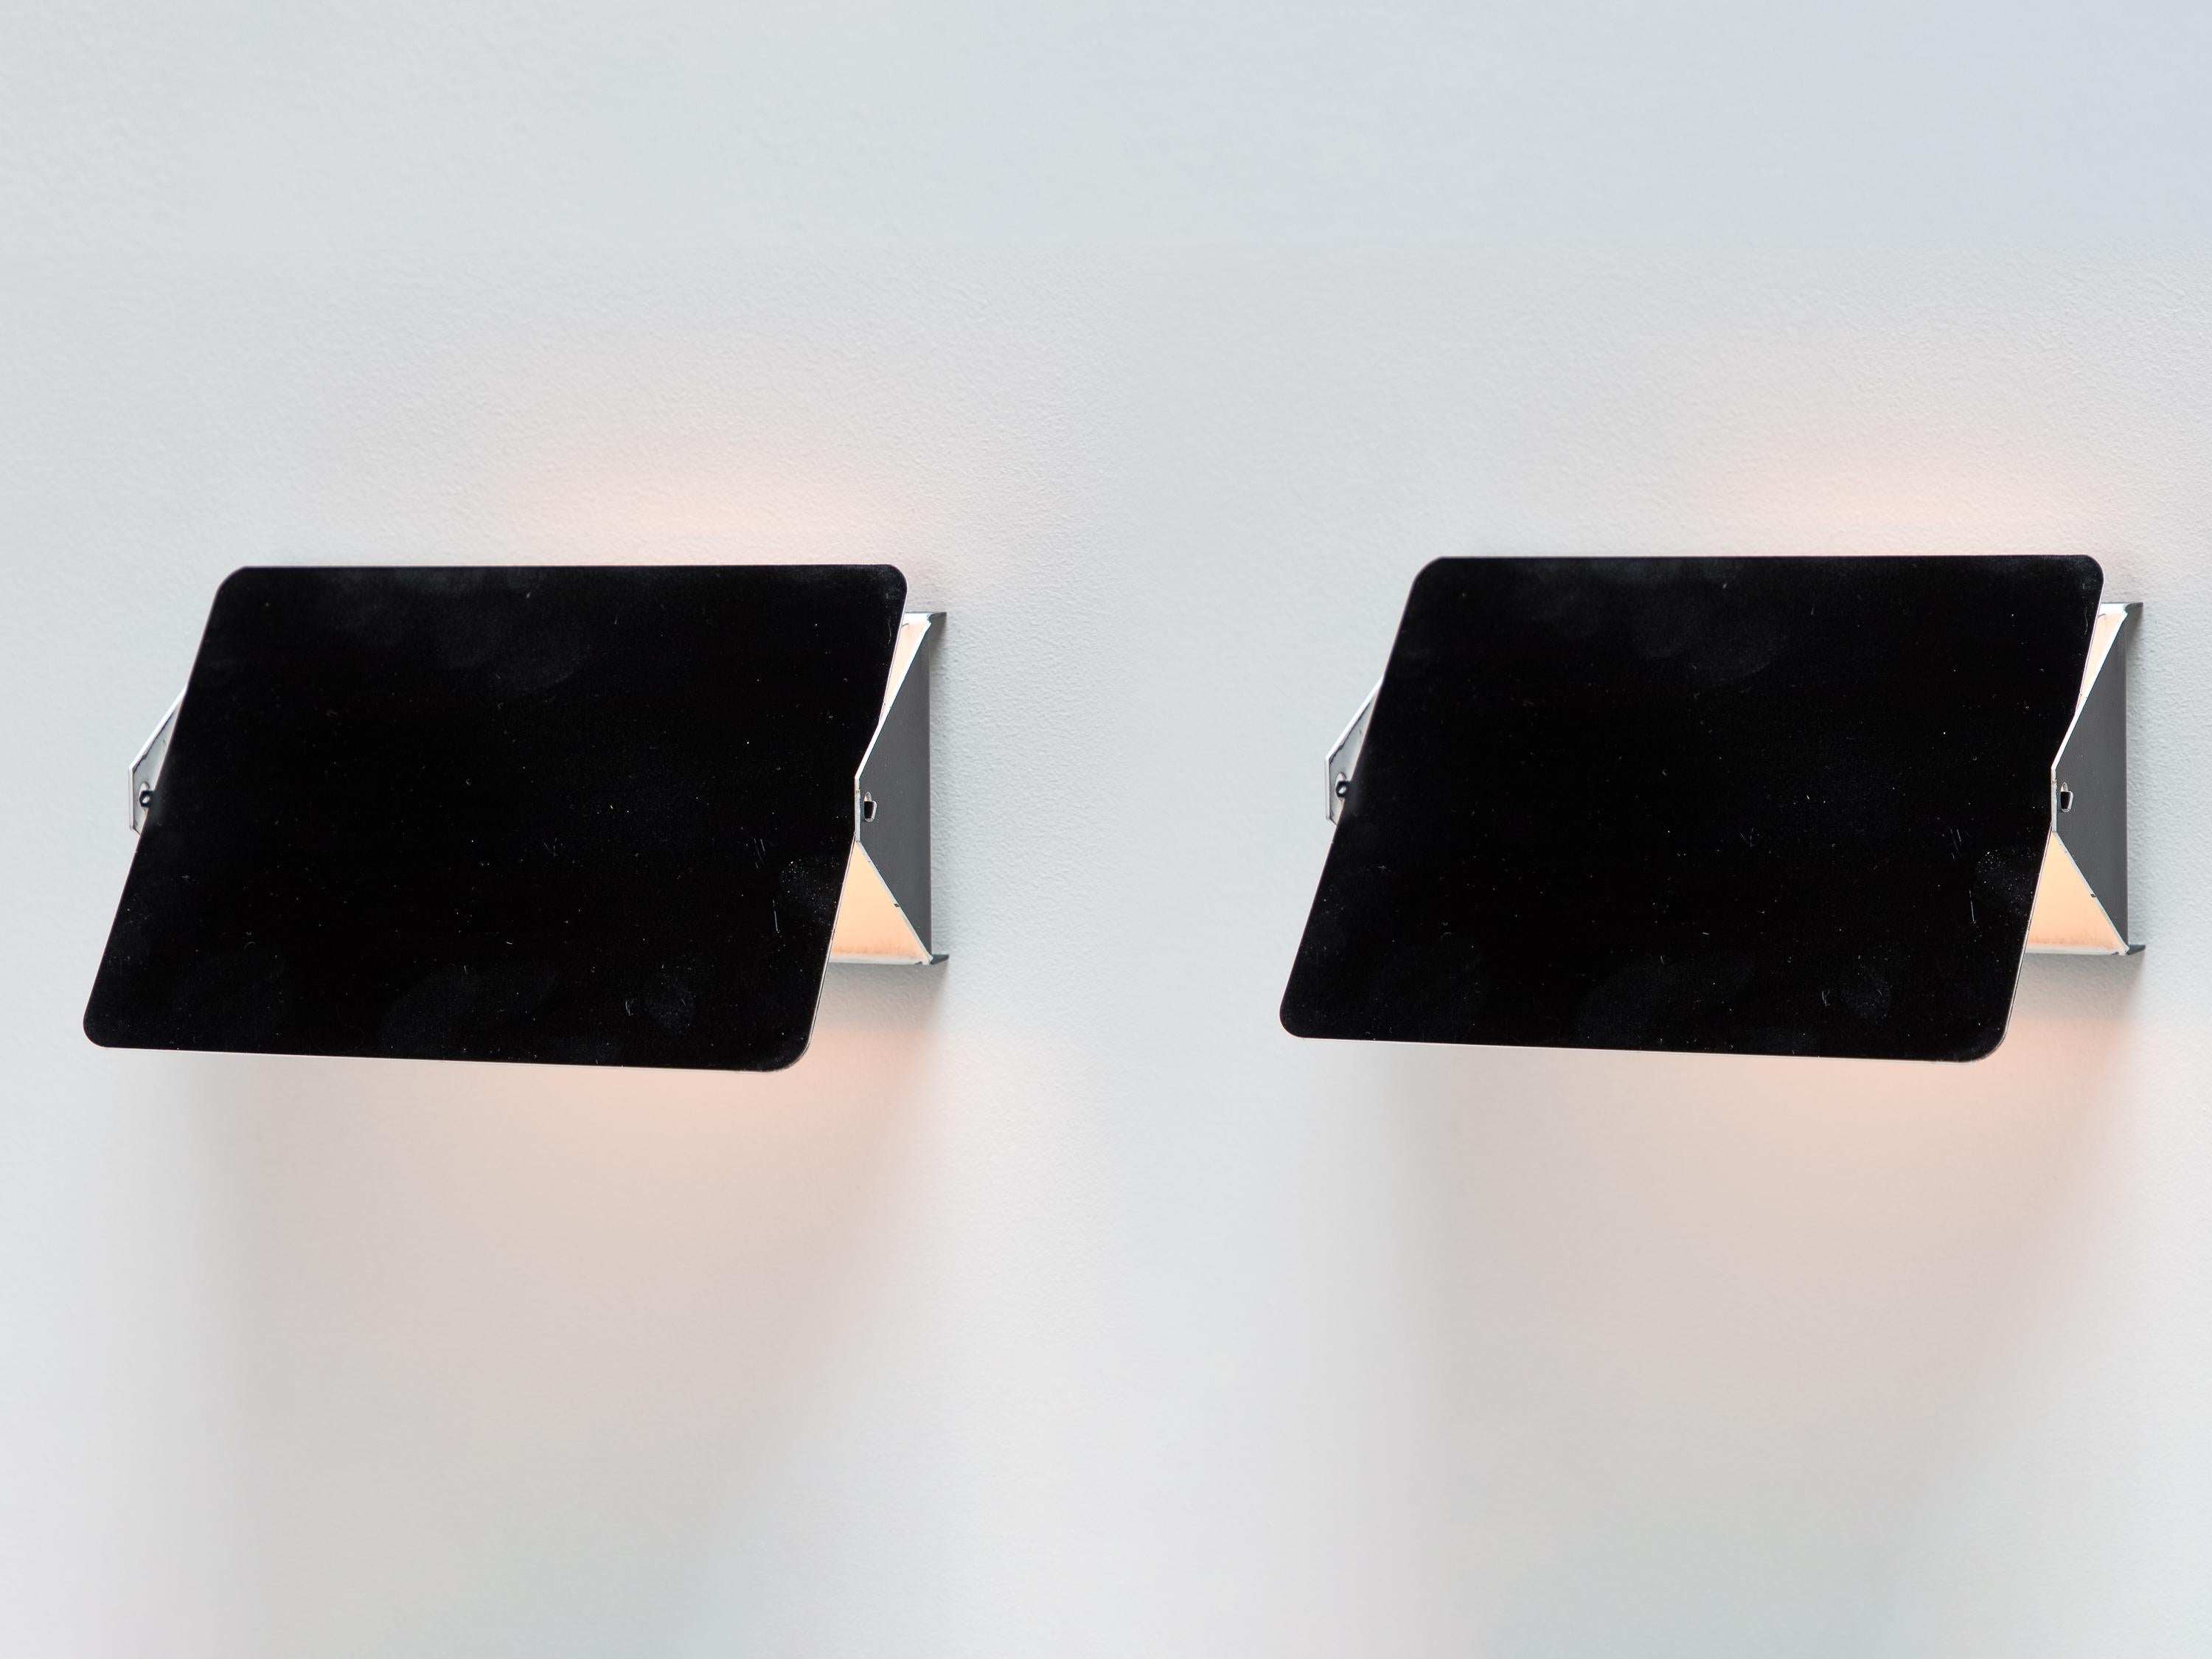 CP1 wall lights, designed by Charlotte Perriand for the iconic Les Arcs ski resort.  Crafted from aluminum, these sconces have a sleek and minimalist style.  The enameled shade pivots up or down, reducing glare and allowing easy light adjustment.